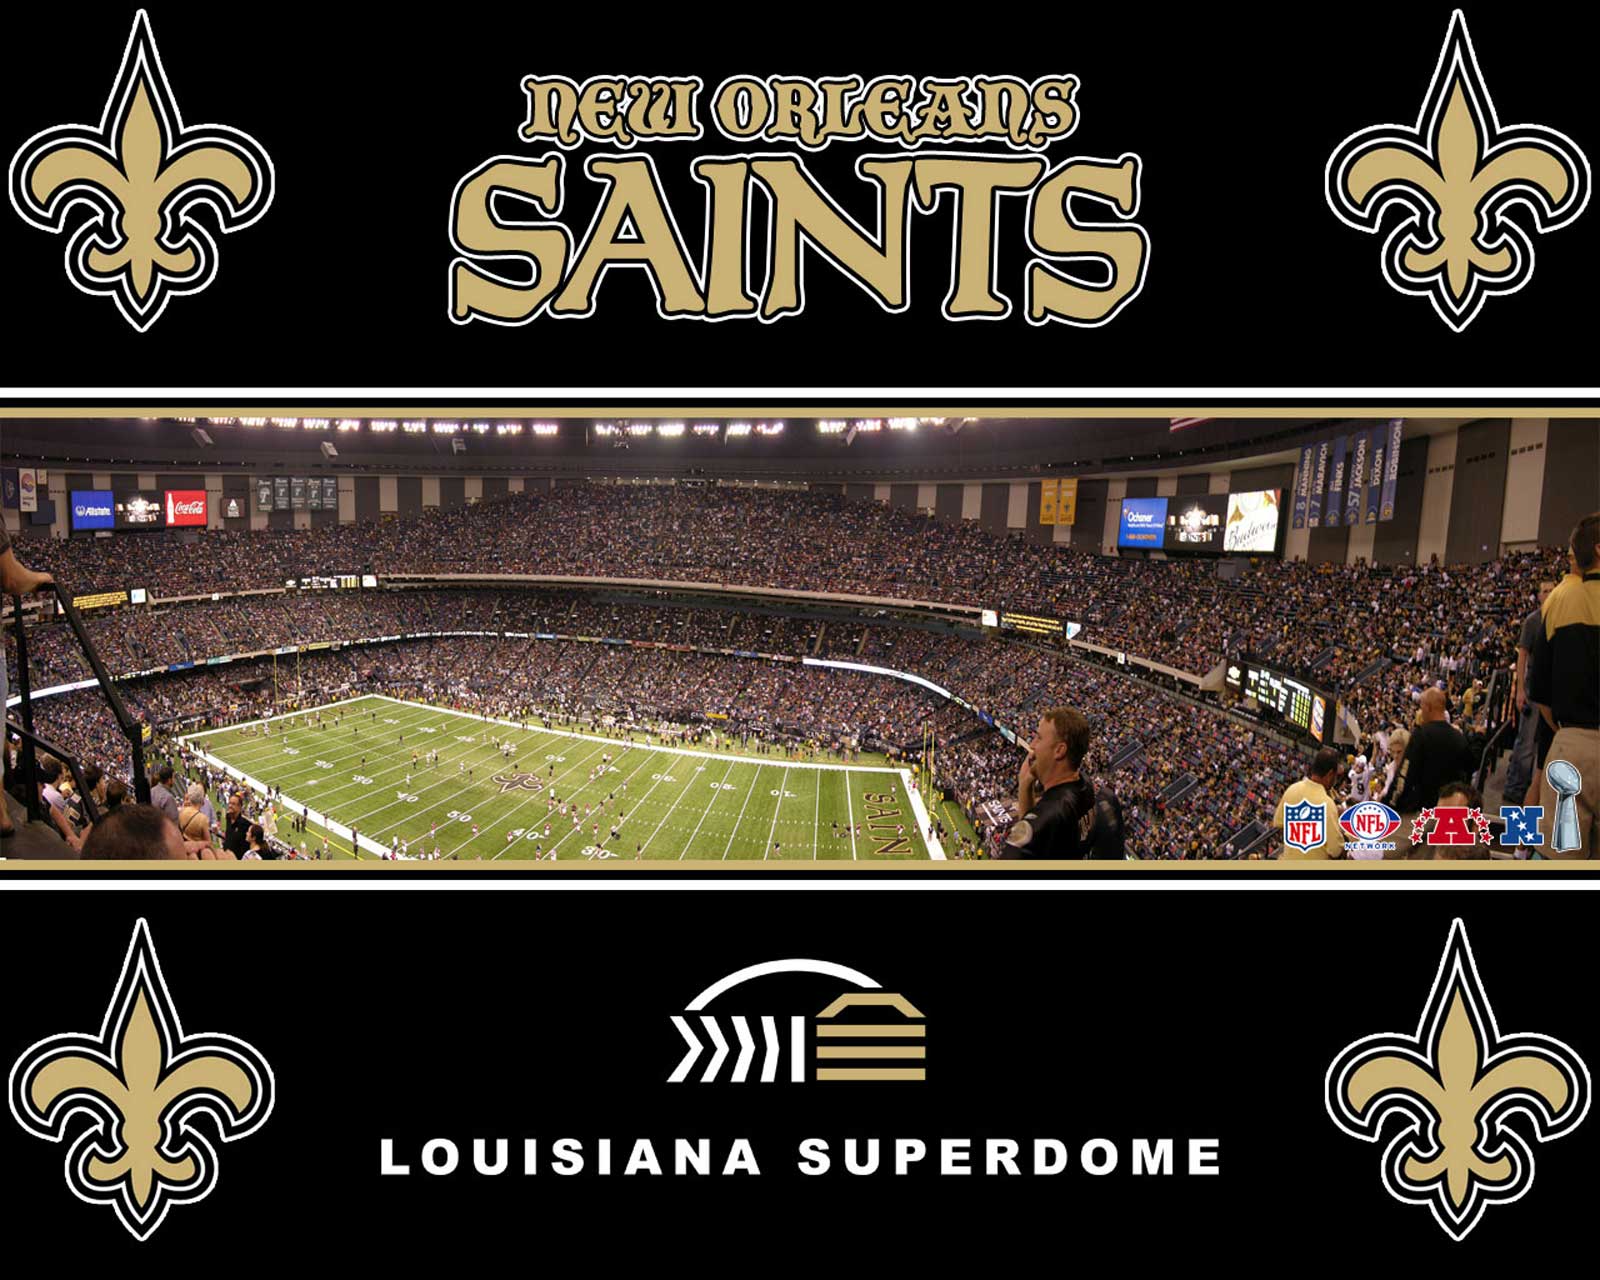 Asked Us For More New Orleans Saints Wallpaper So Here You Have